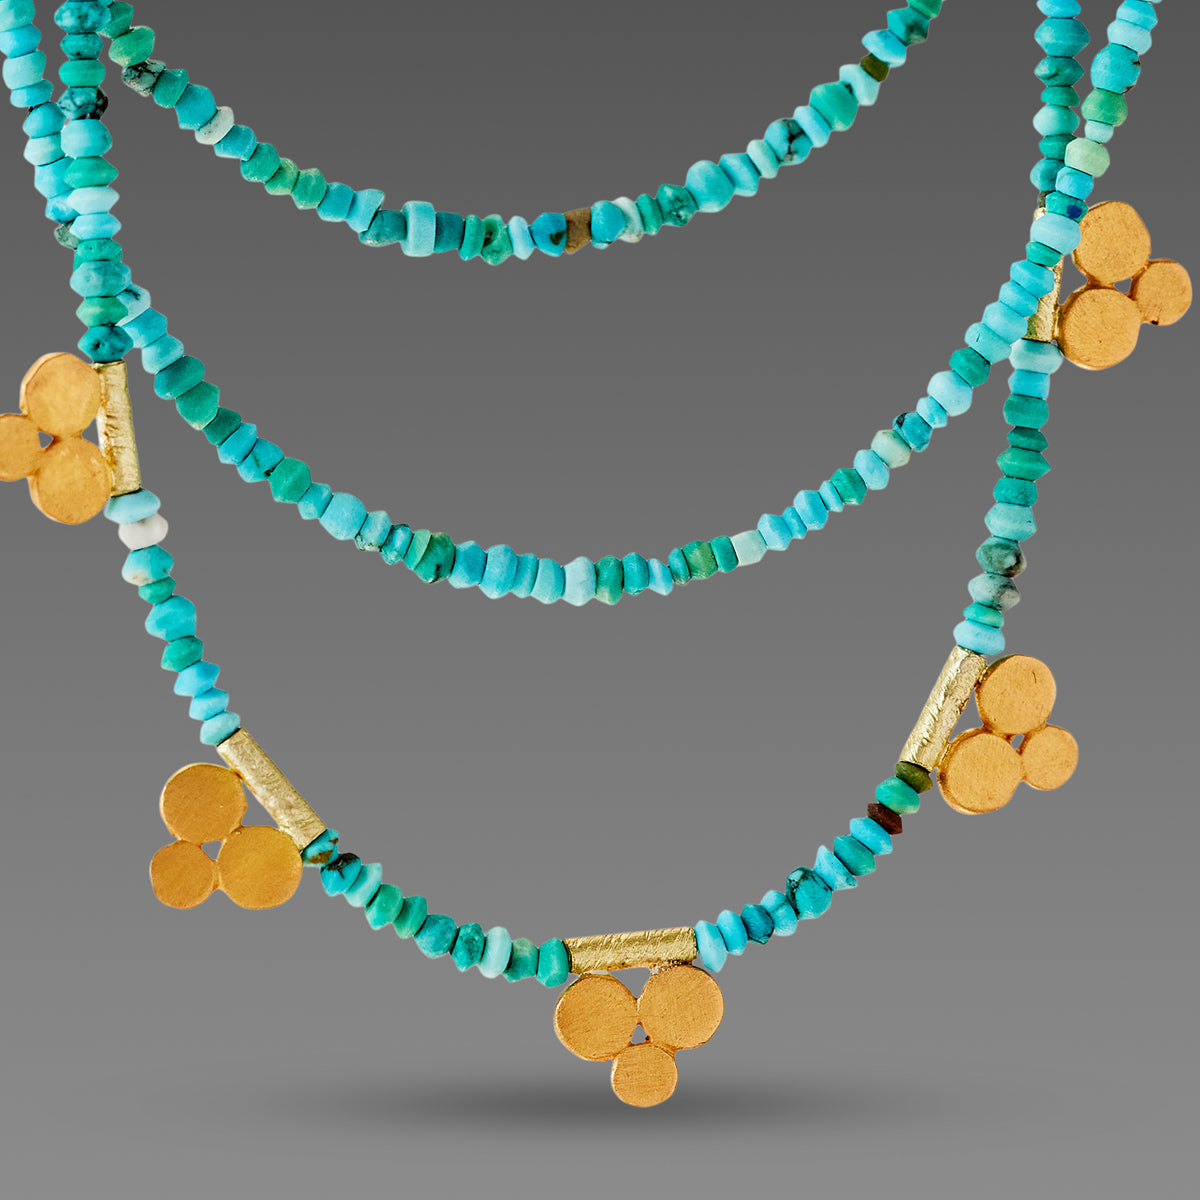 Turquoise Beads Jewelry Making, Turquoise Jewelry Making Gold